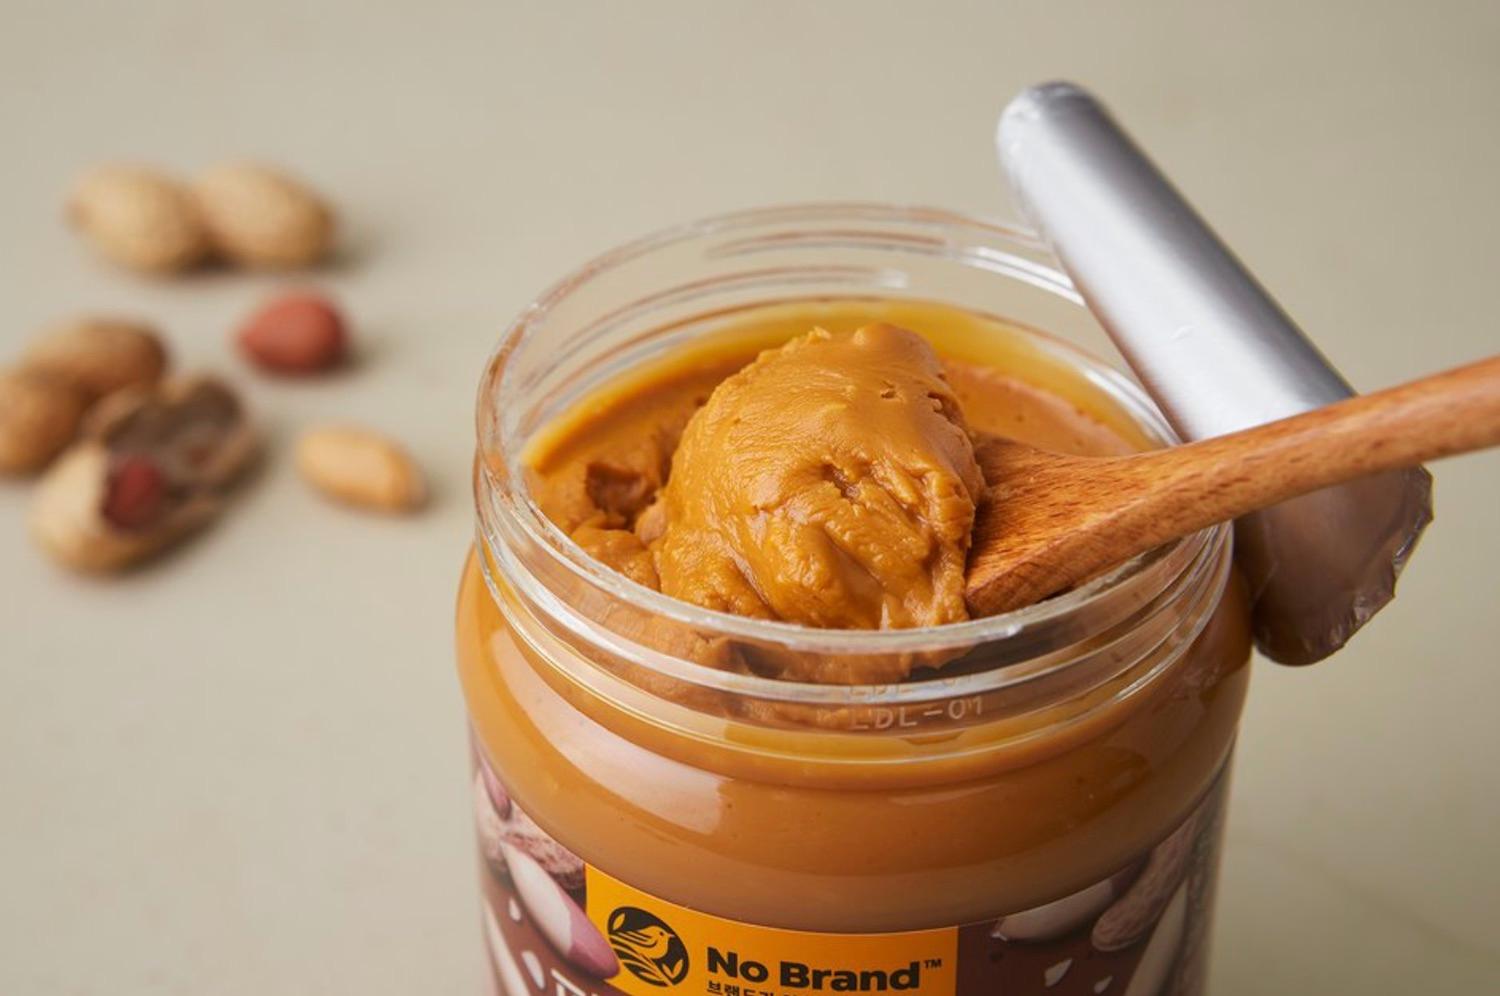 Korean brand no brand's crunchy peanut better opened with a spoon taking a scoop